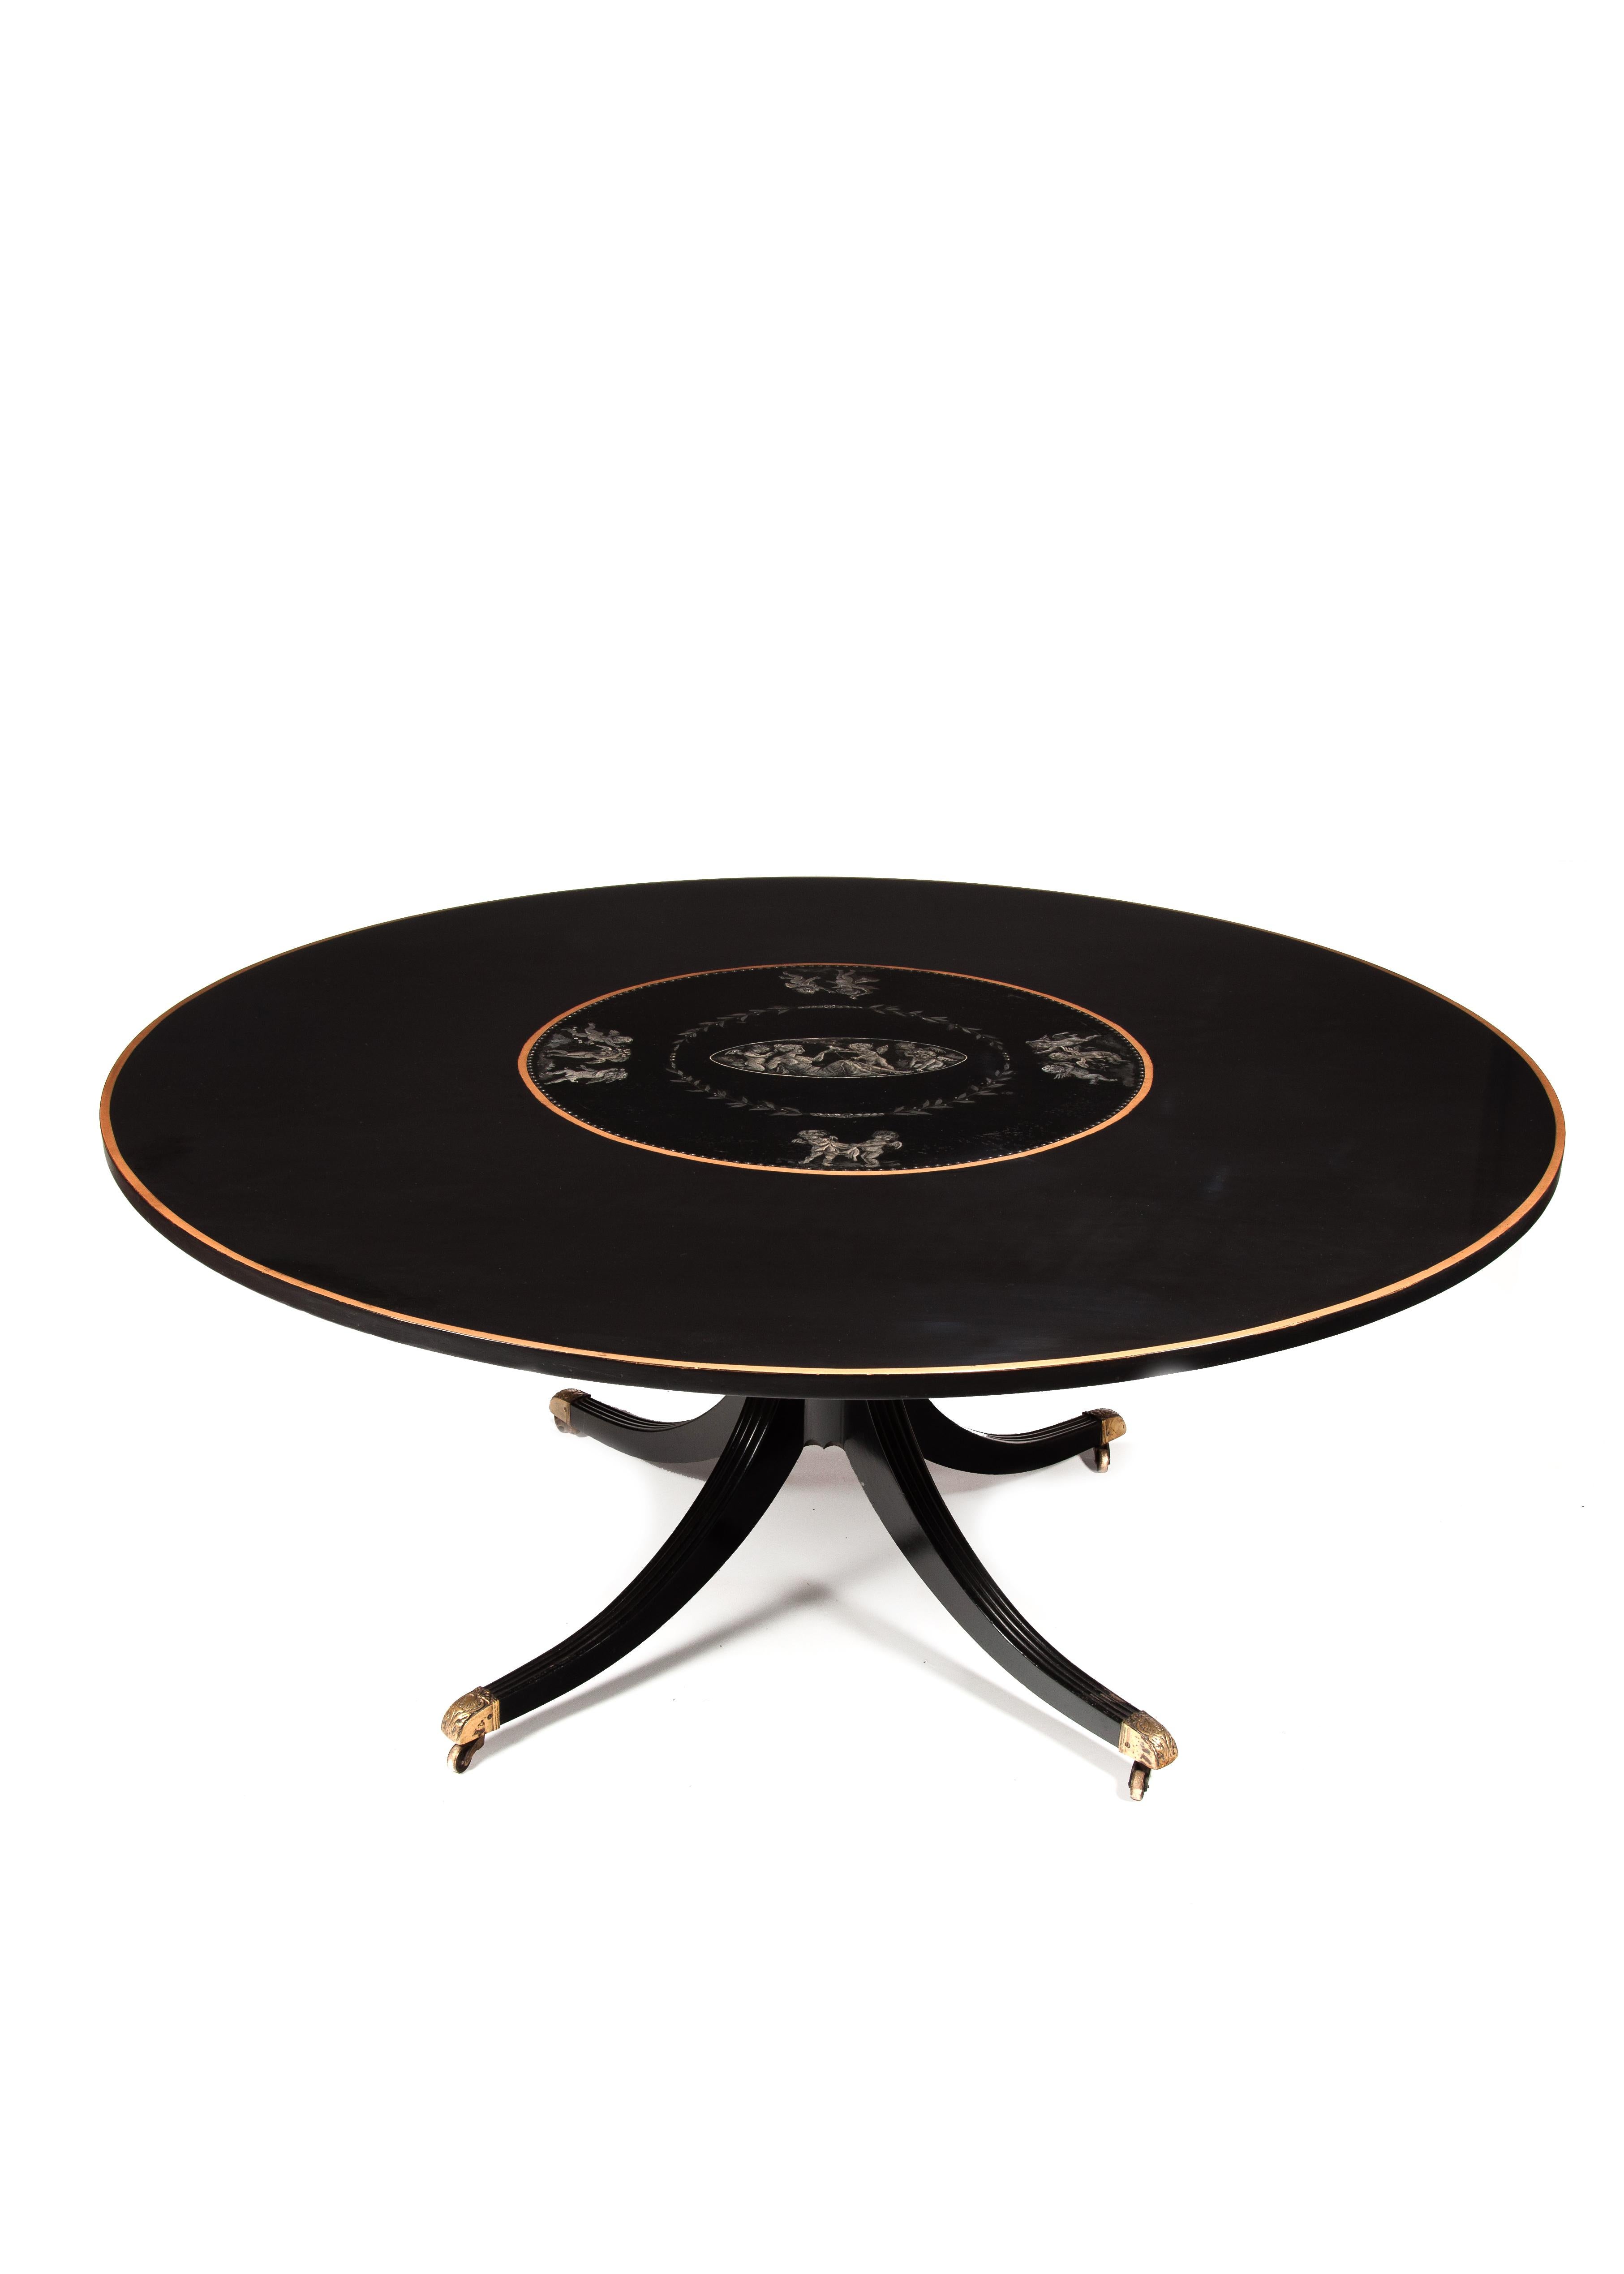 English Large Circular Mid-20th Century Ebonized, Gilt and Painted Dining Table